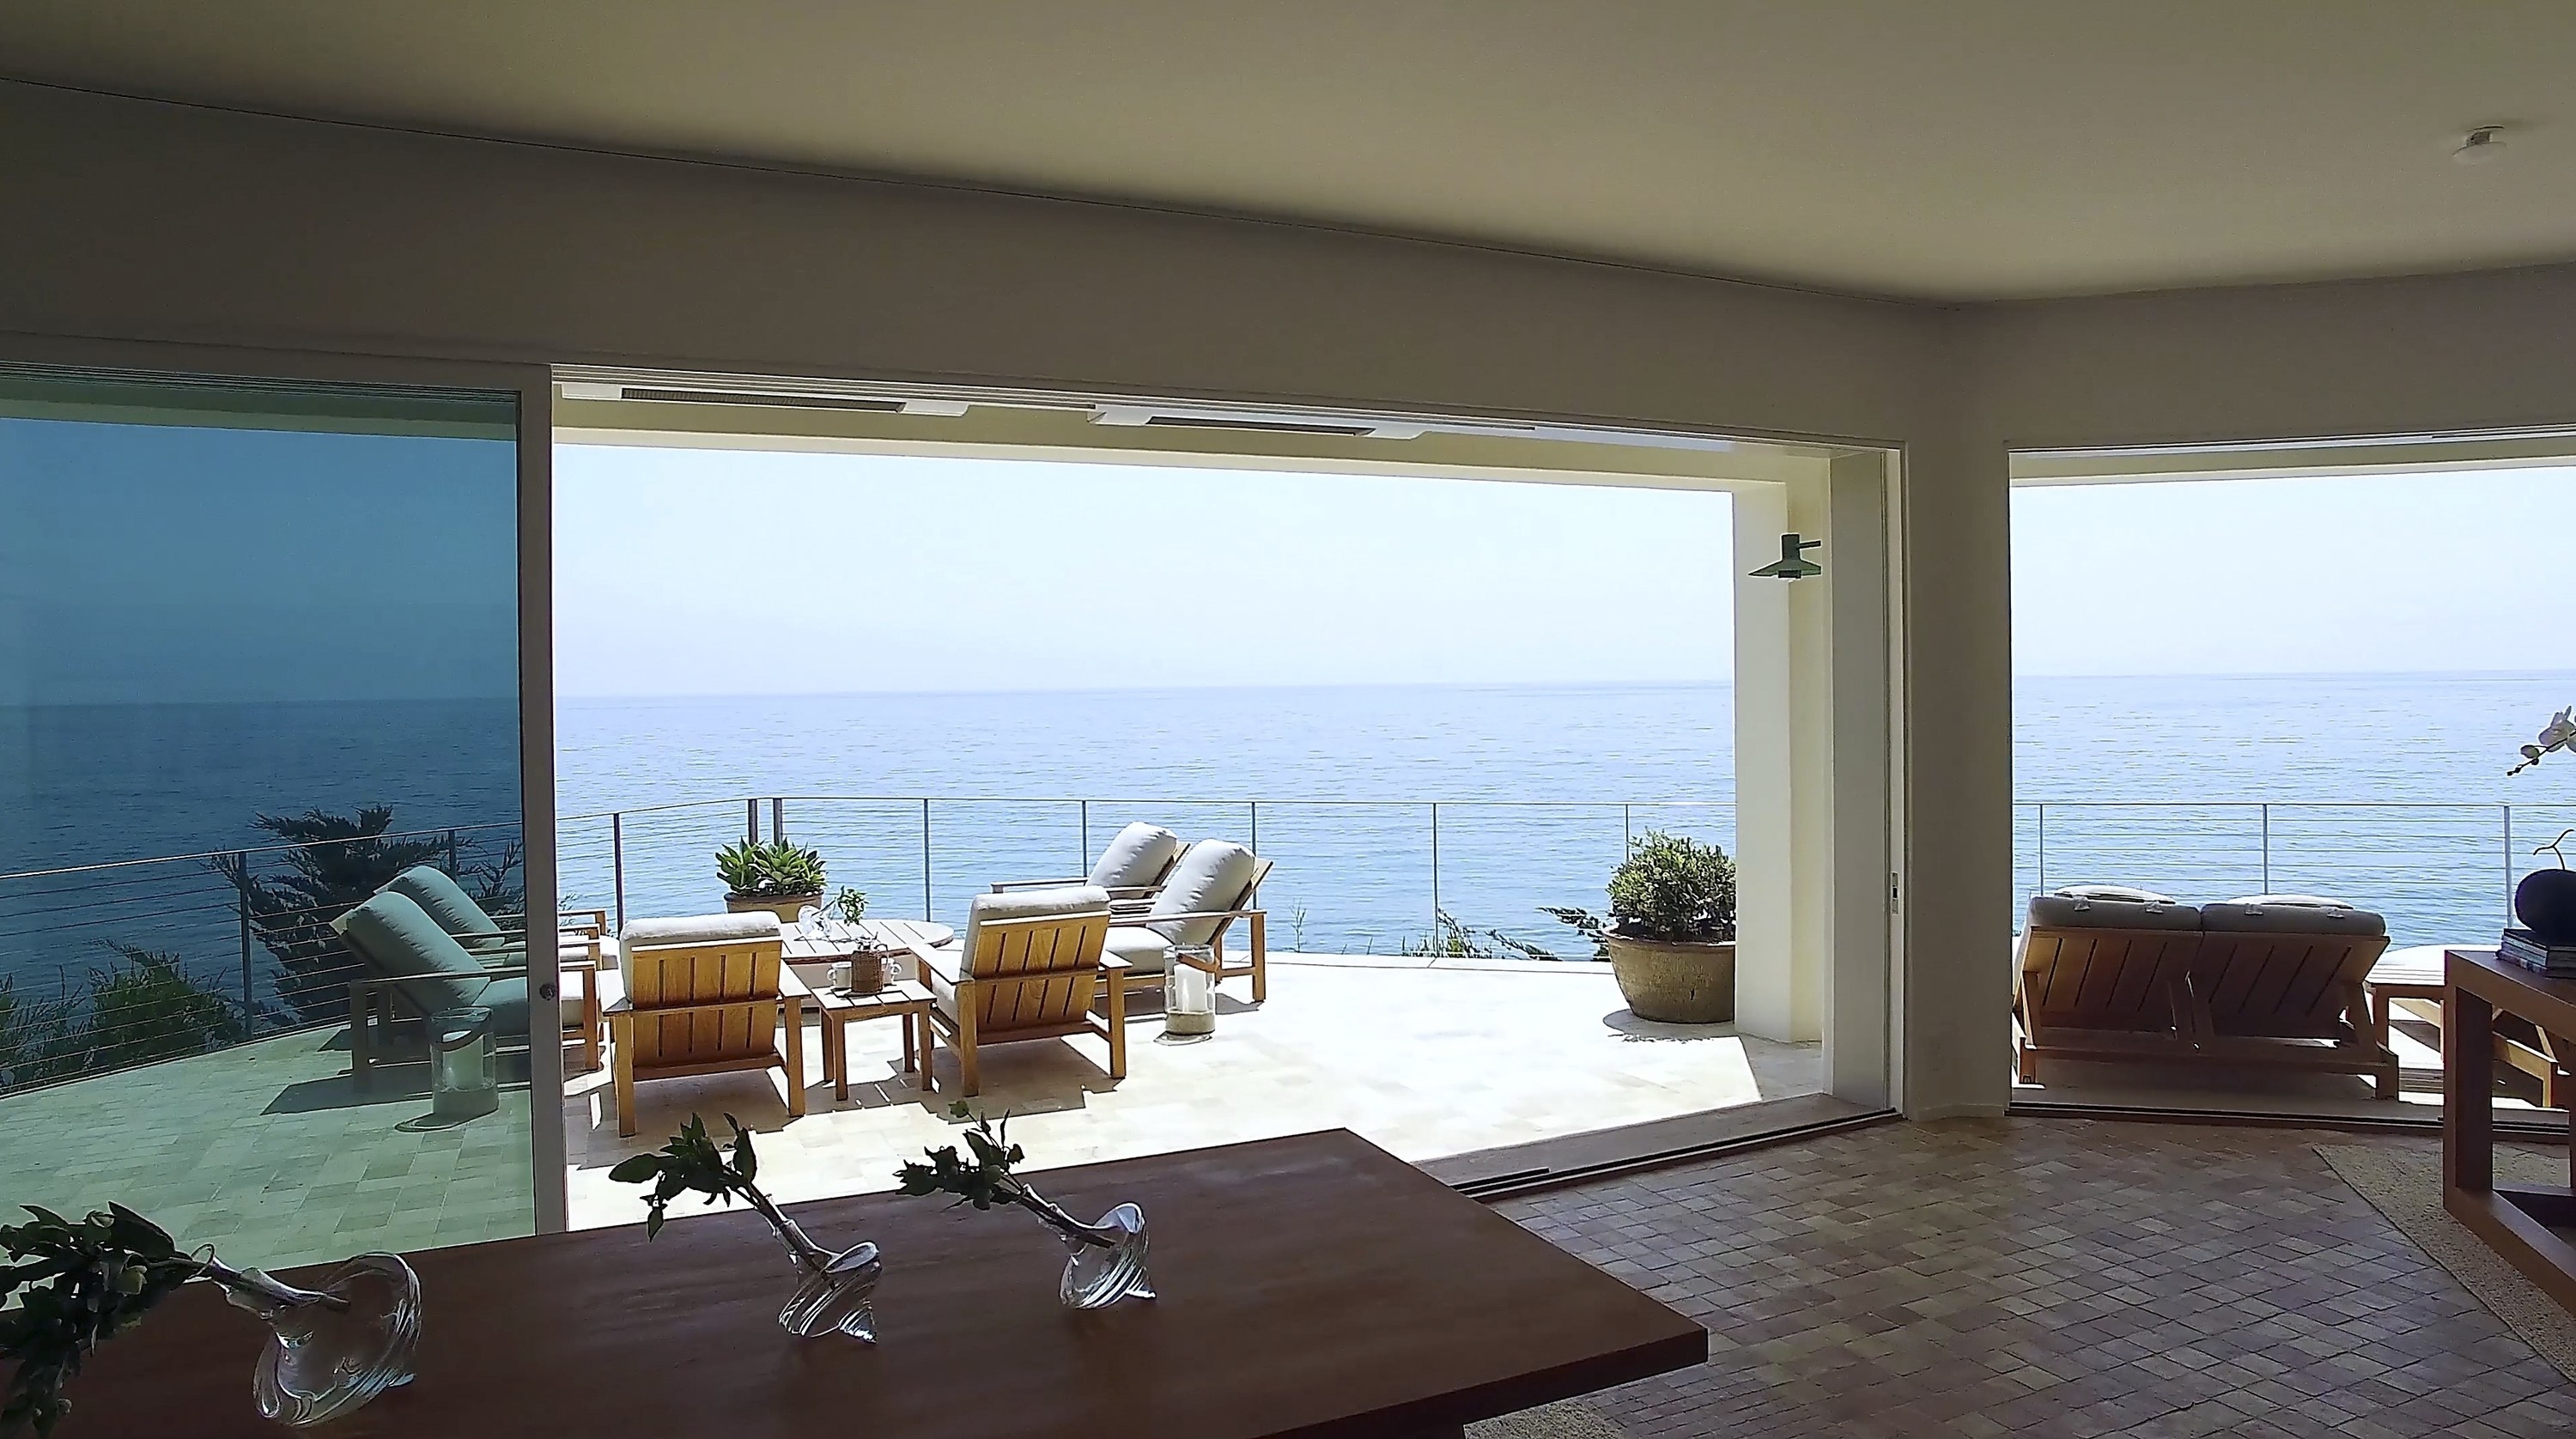 A view from inside the house shows a patio area with table and chairs overlooking the ocean